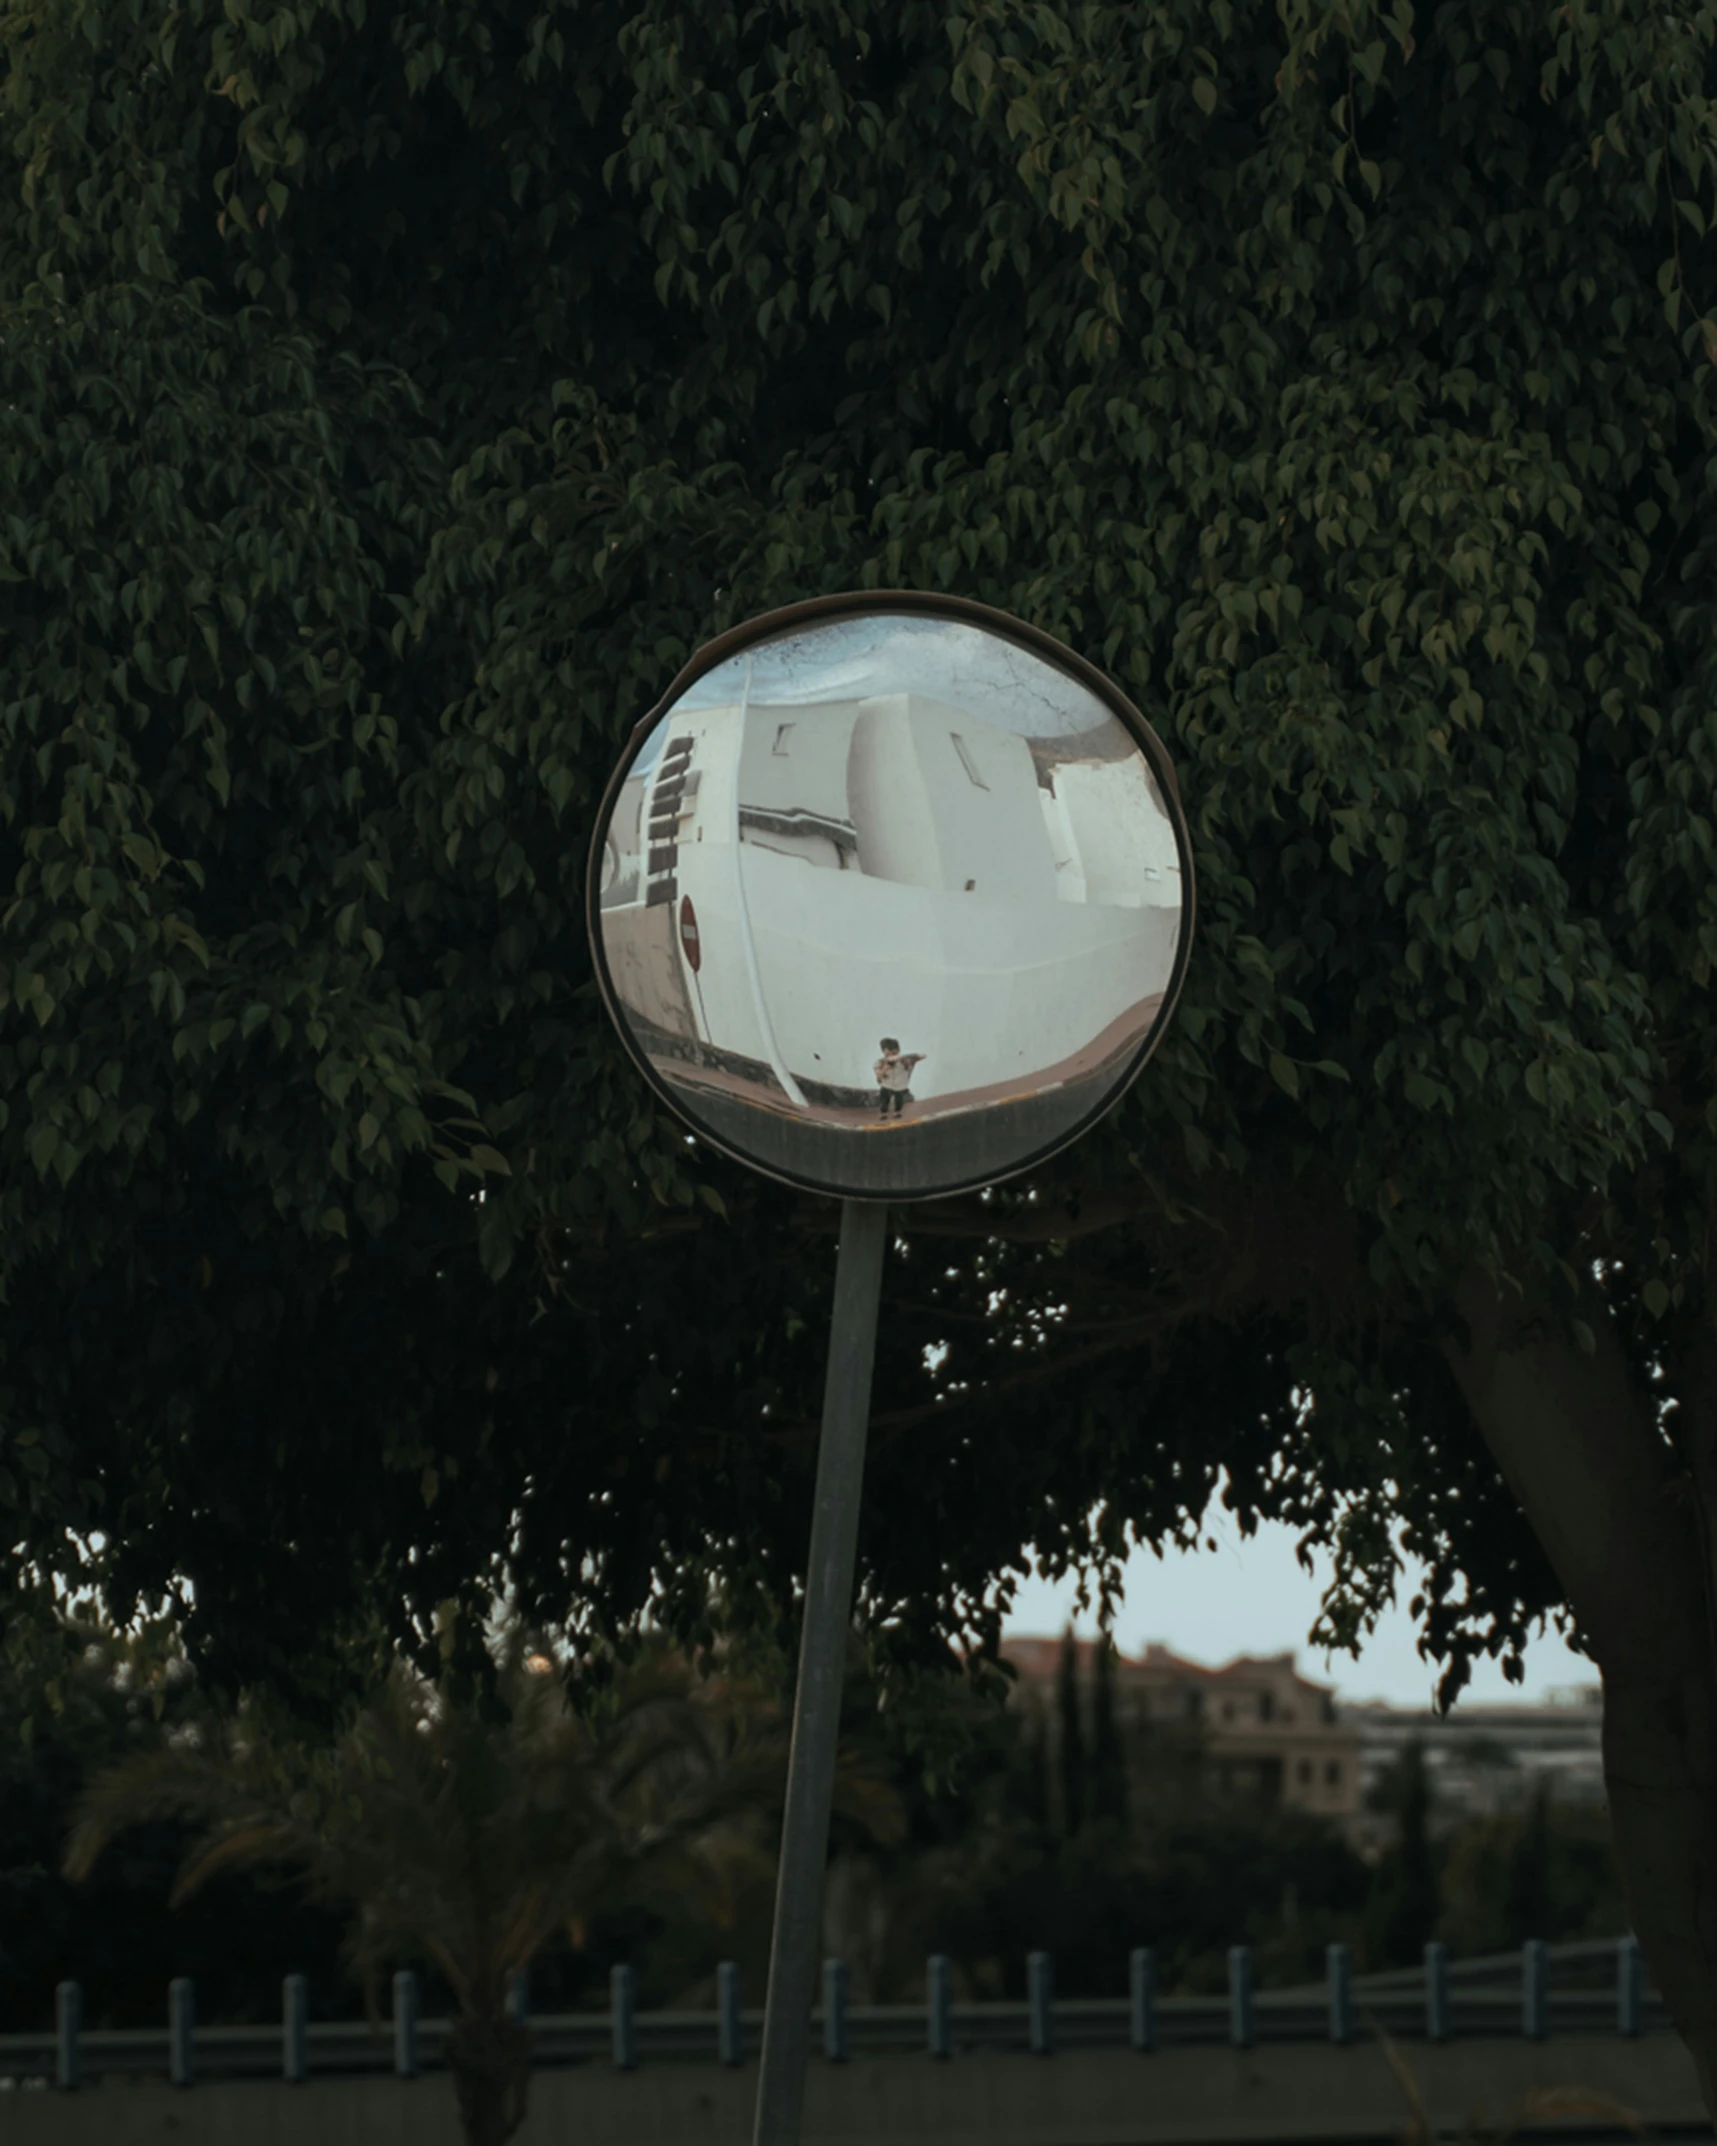 a street mirror reflects a reflection of an image on it